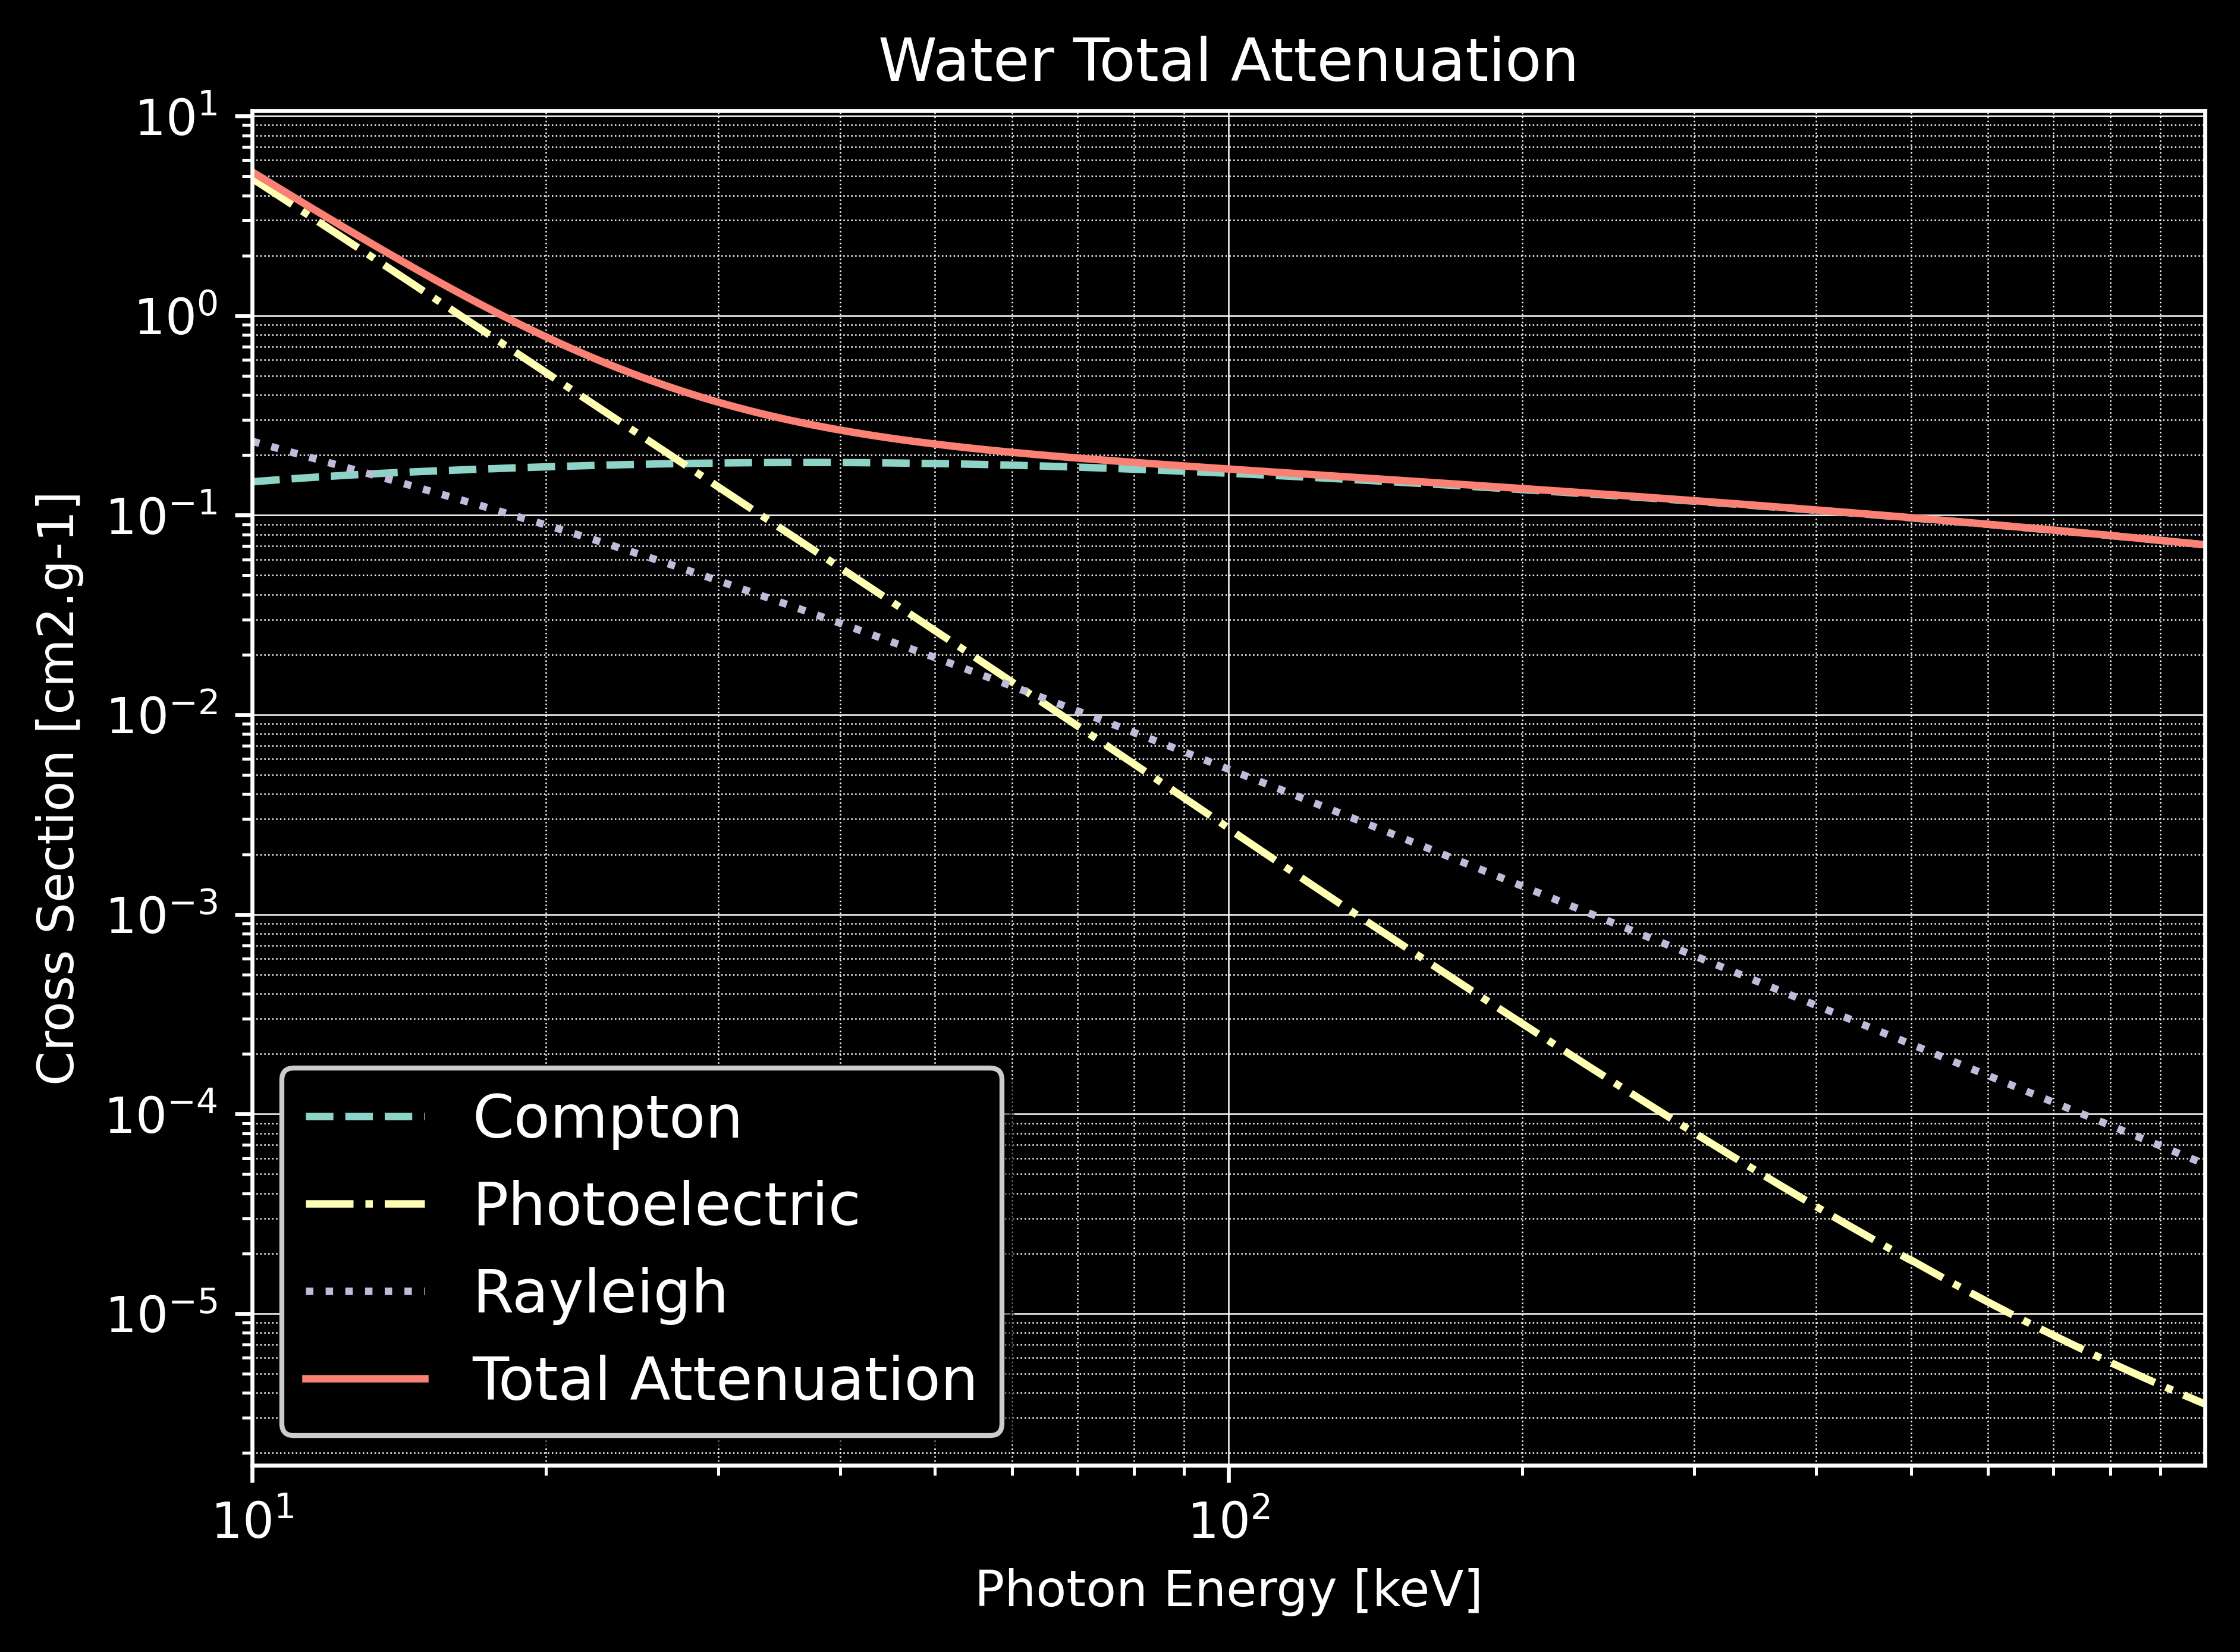 _images/Water_Total_Attenuation.png